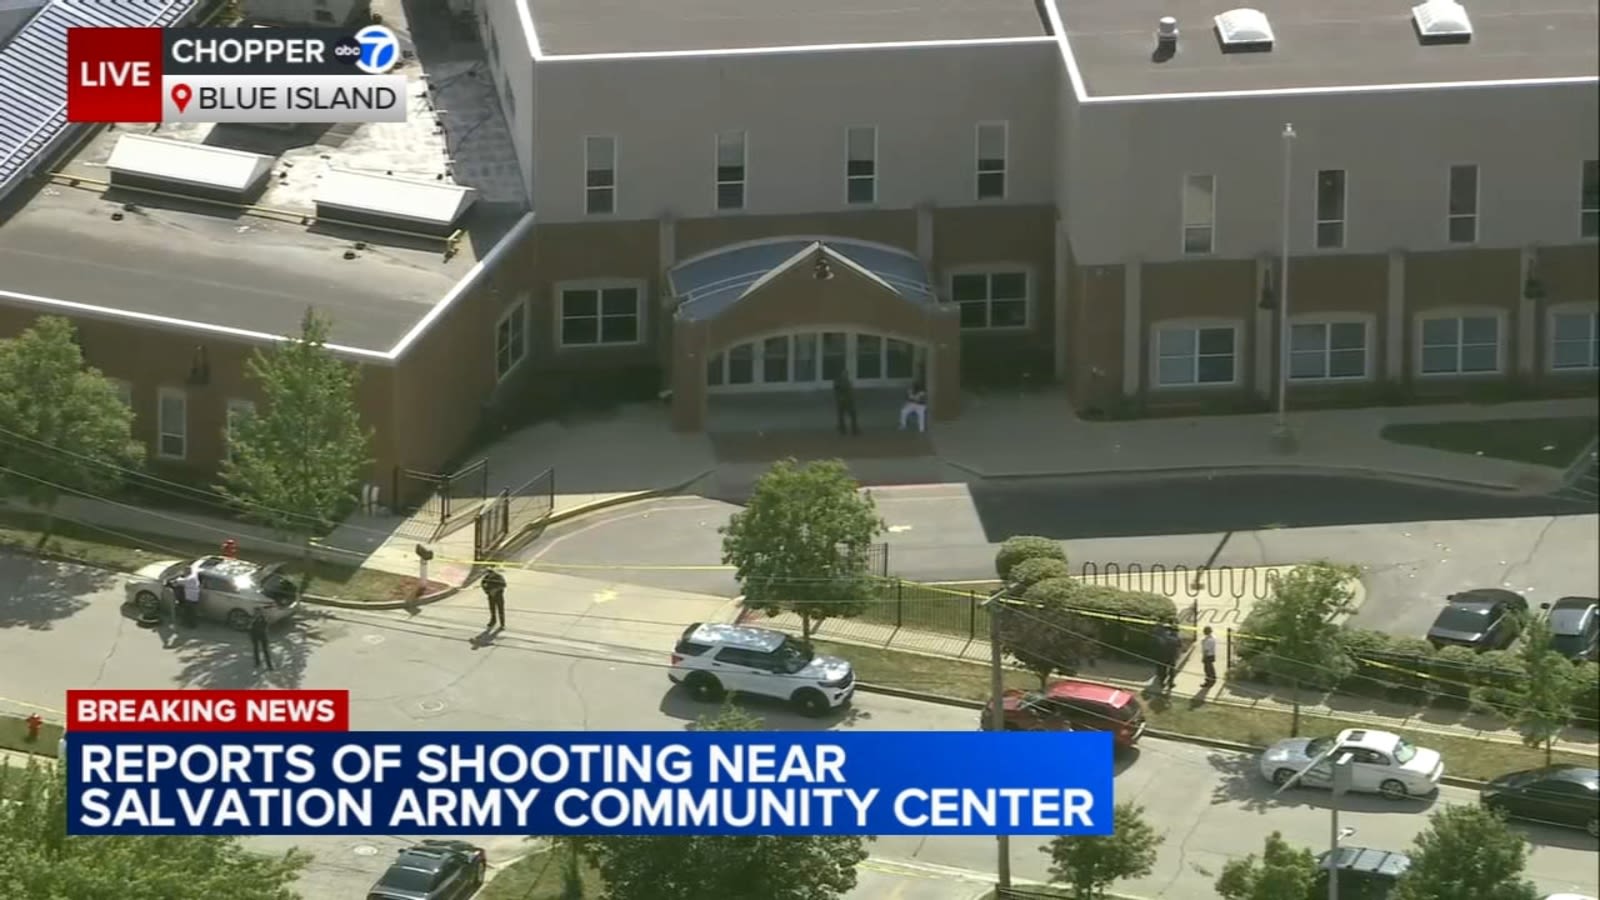 3 injured in shooting during funeral at Salvation Army church; 1 in custody, Blue Island police say